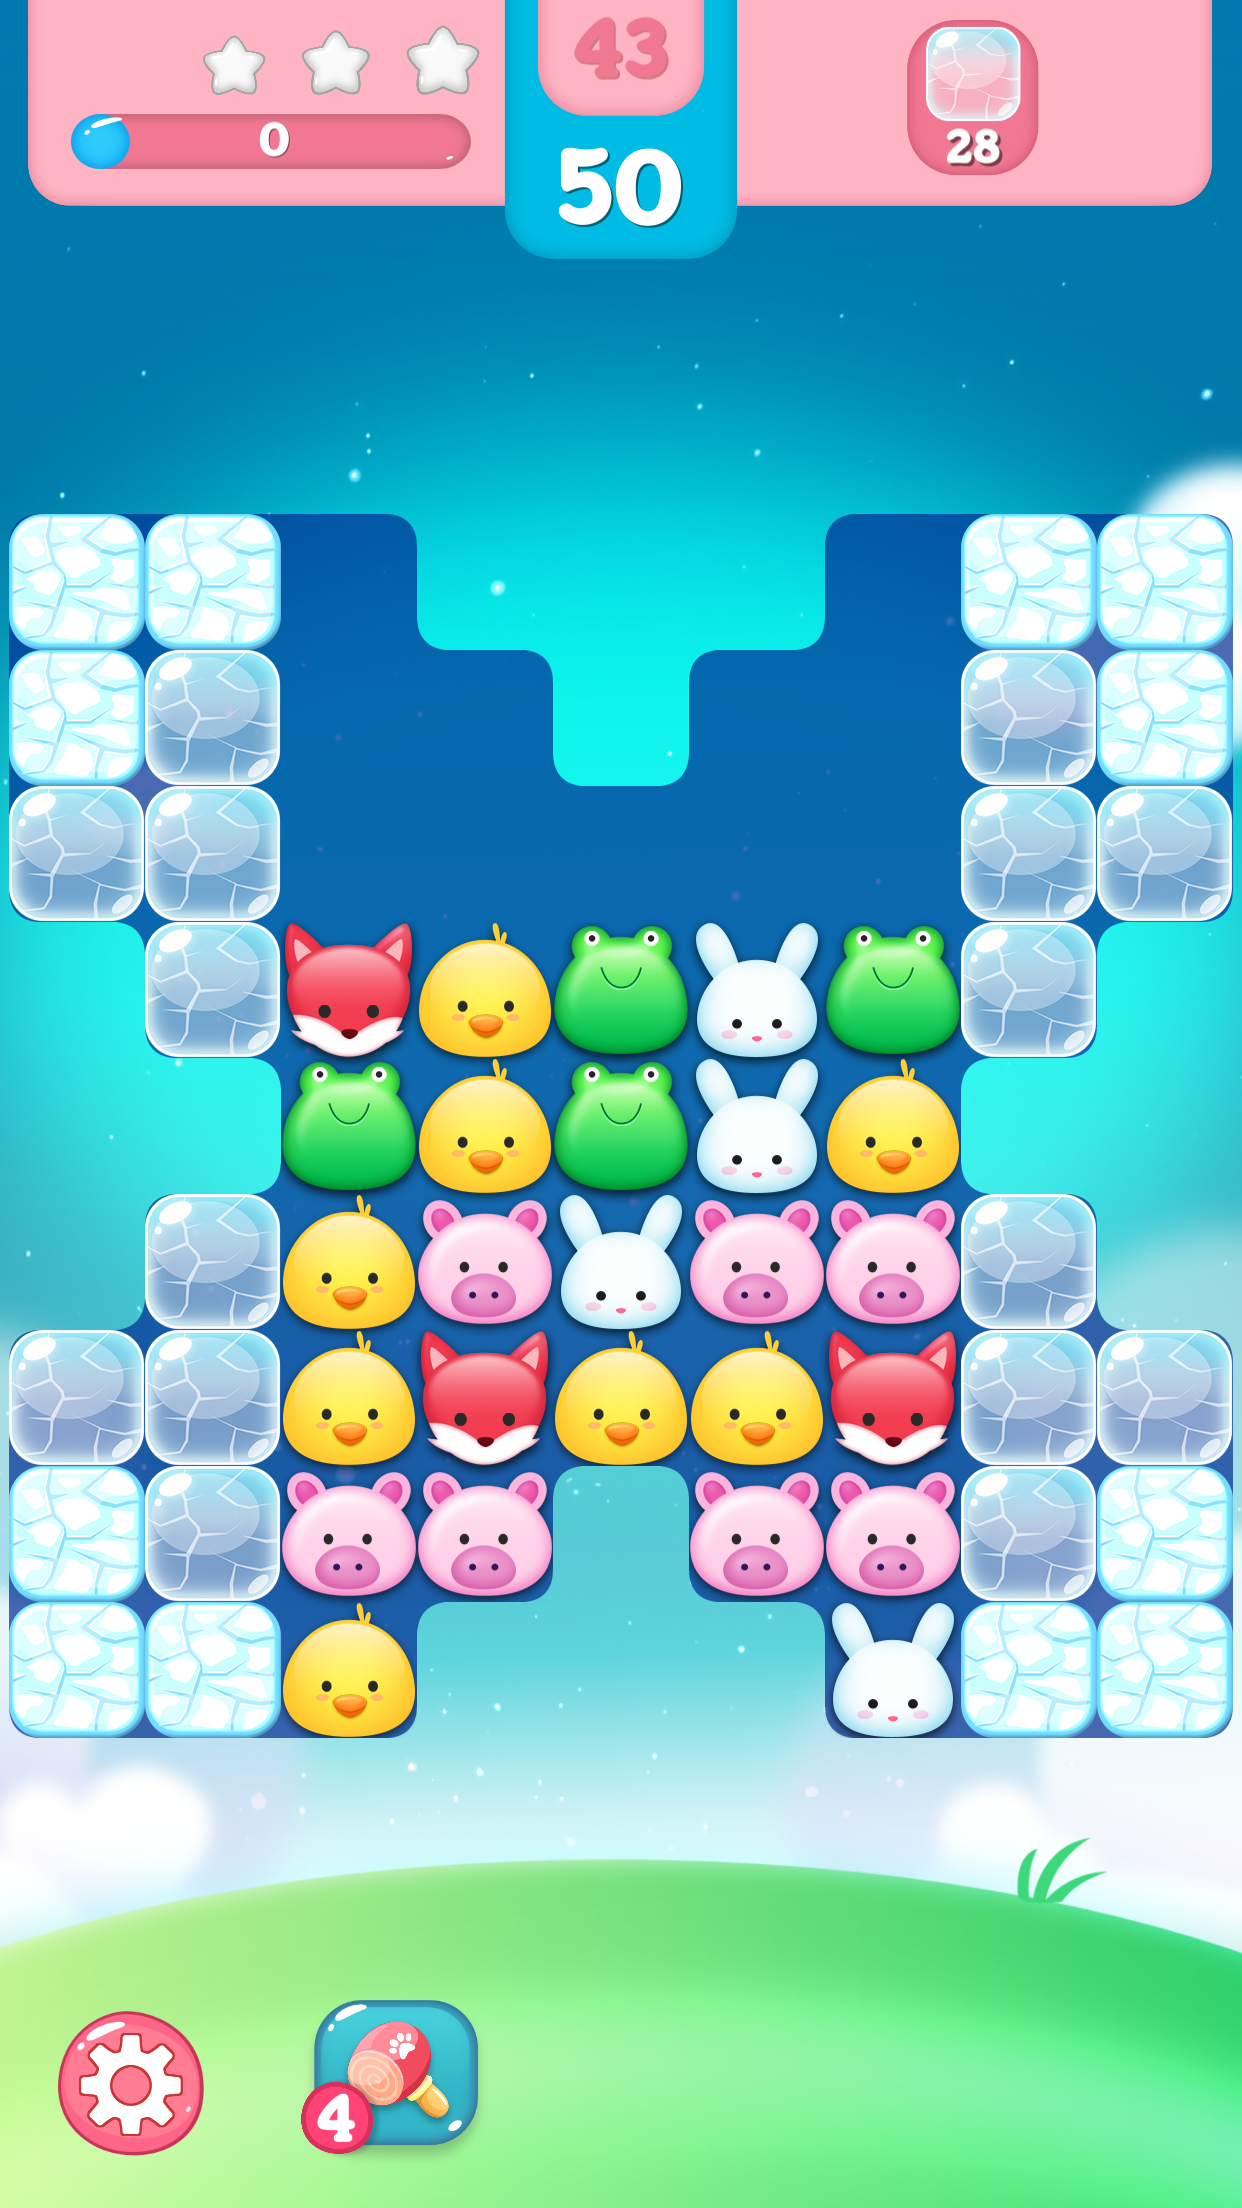 Screenshot 1 of Toon Puzzle Quest - Explosion d'animaux 2.1